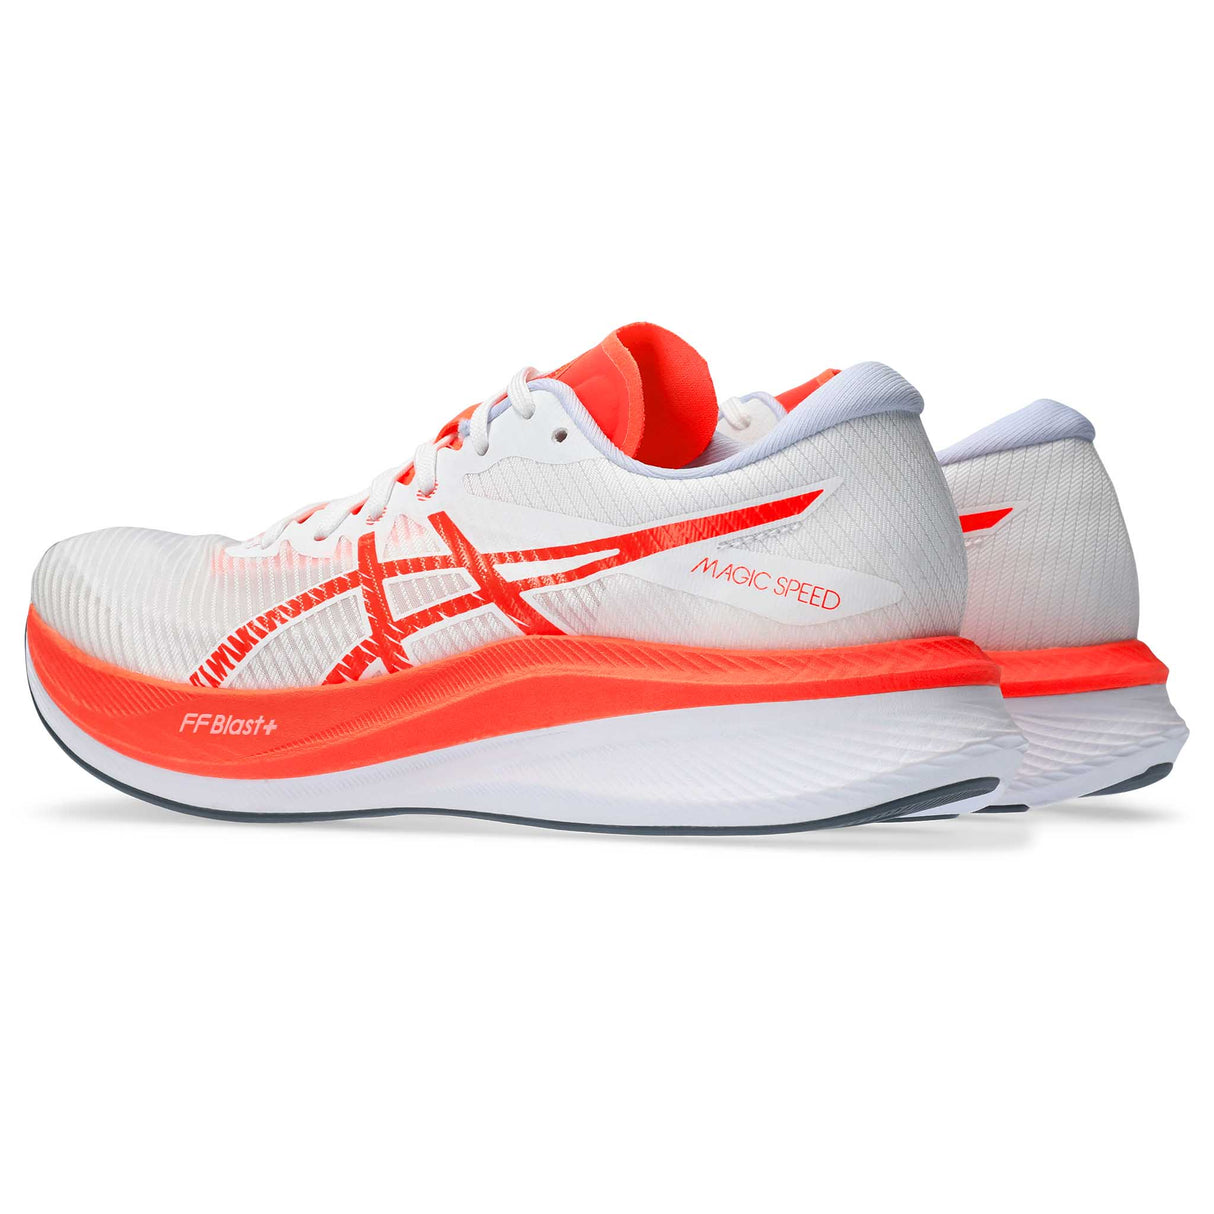 ASICS Magic Speed 3 souliers de course homme paire lateral- White / Sunrise Red